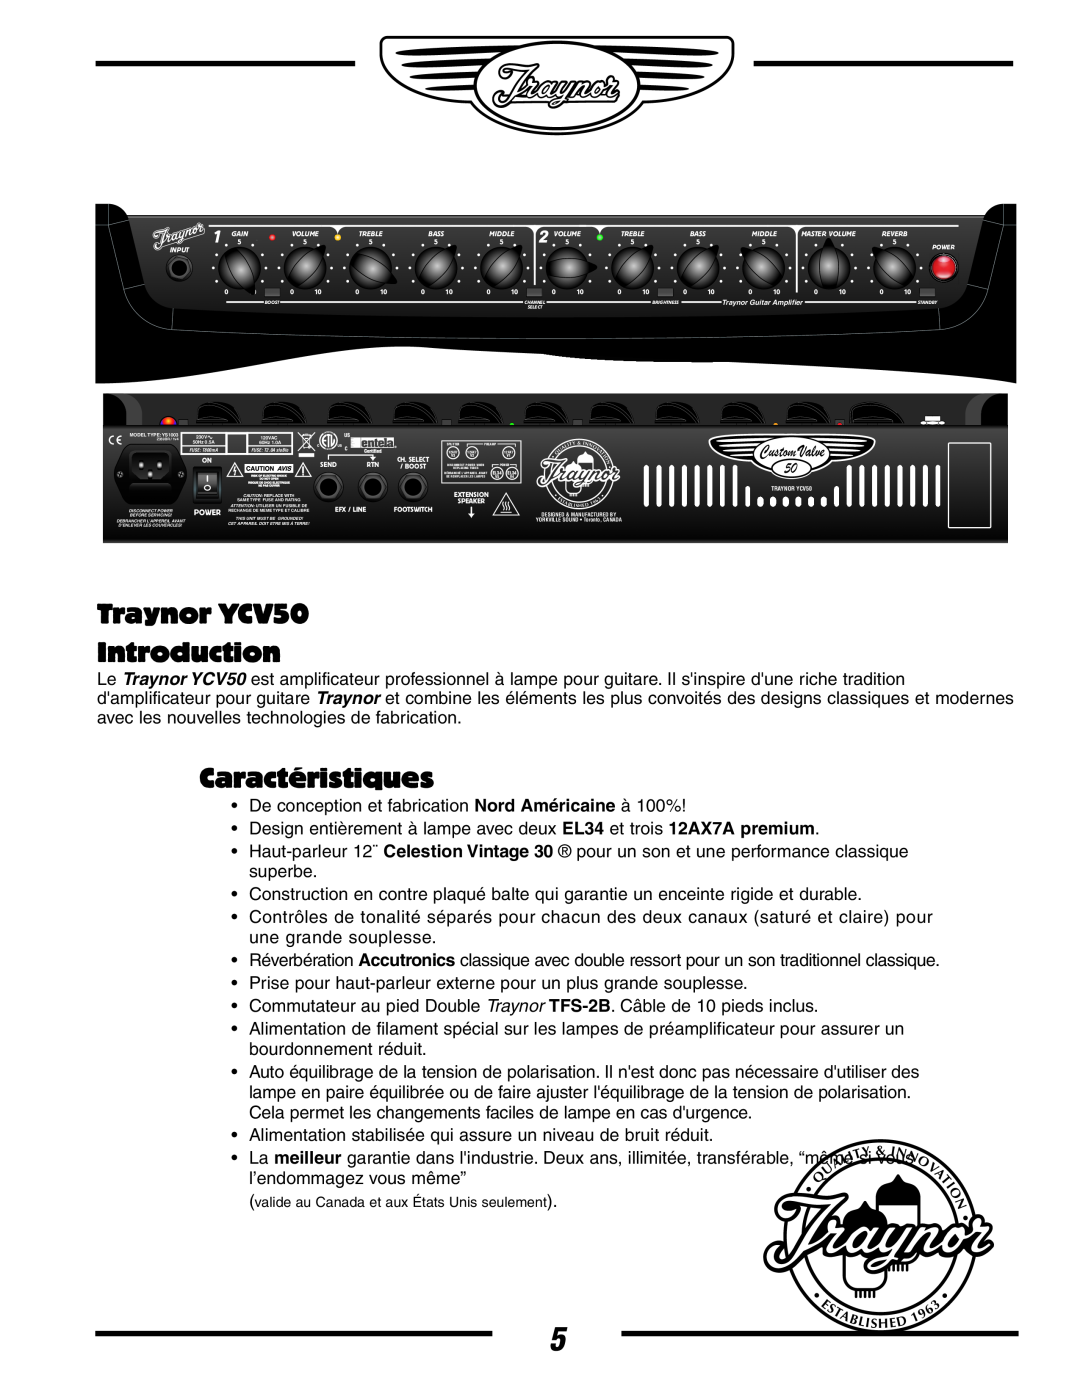 Yorkville Sound YS1003 owner manual Traynor YCV50 Introduction, Caractéristiques, Custom Valve, Ov A T I O 